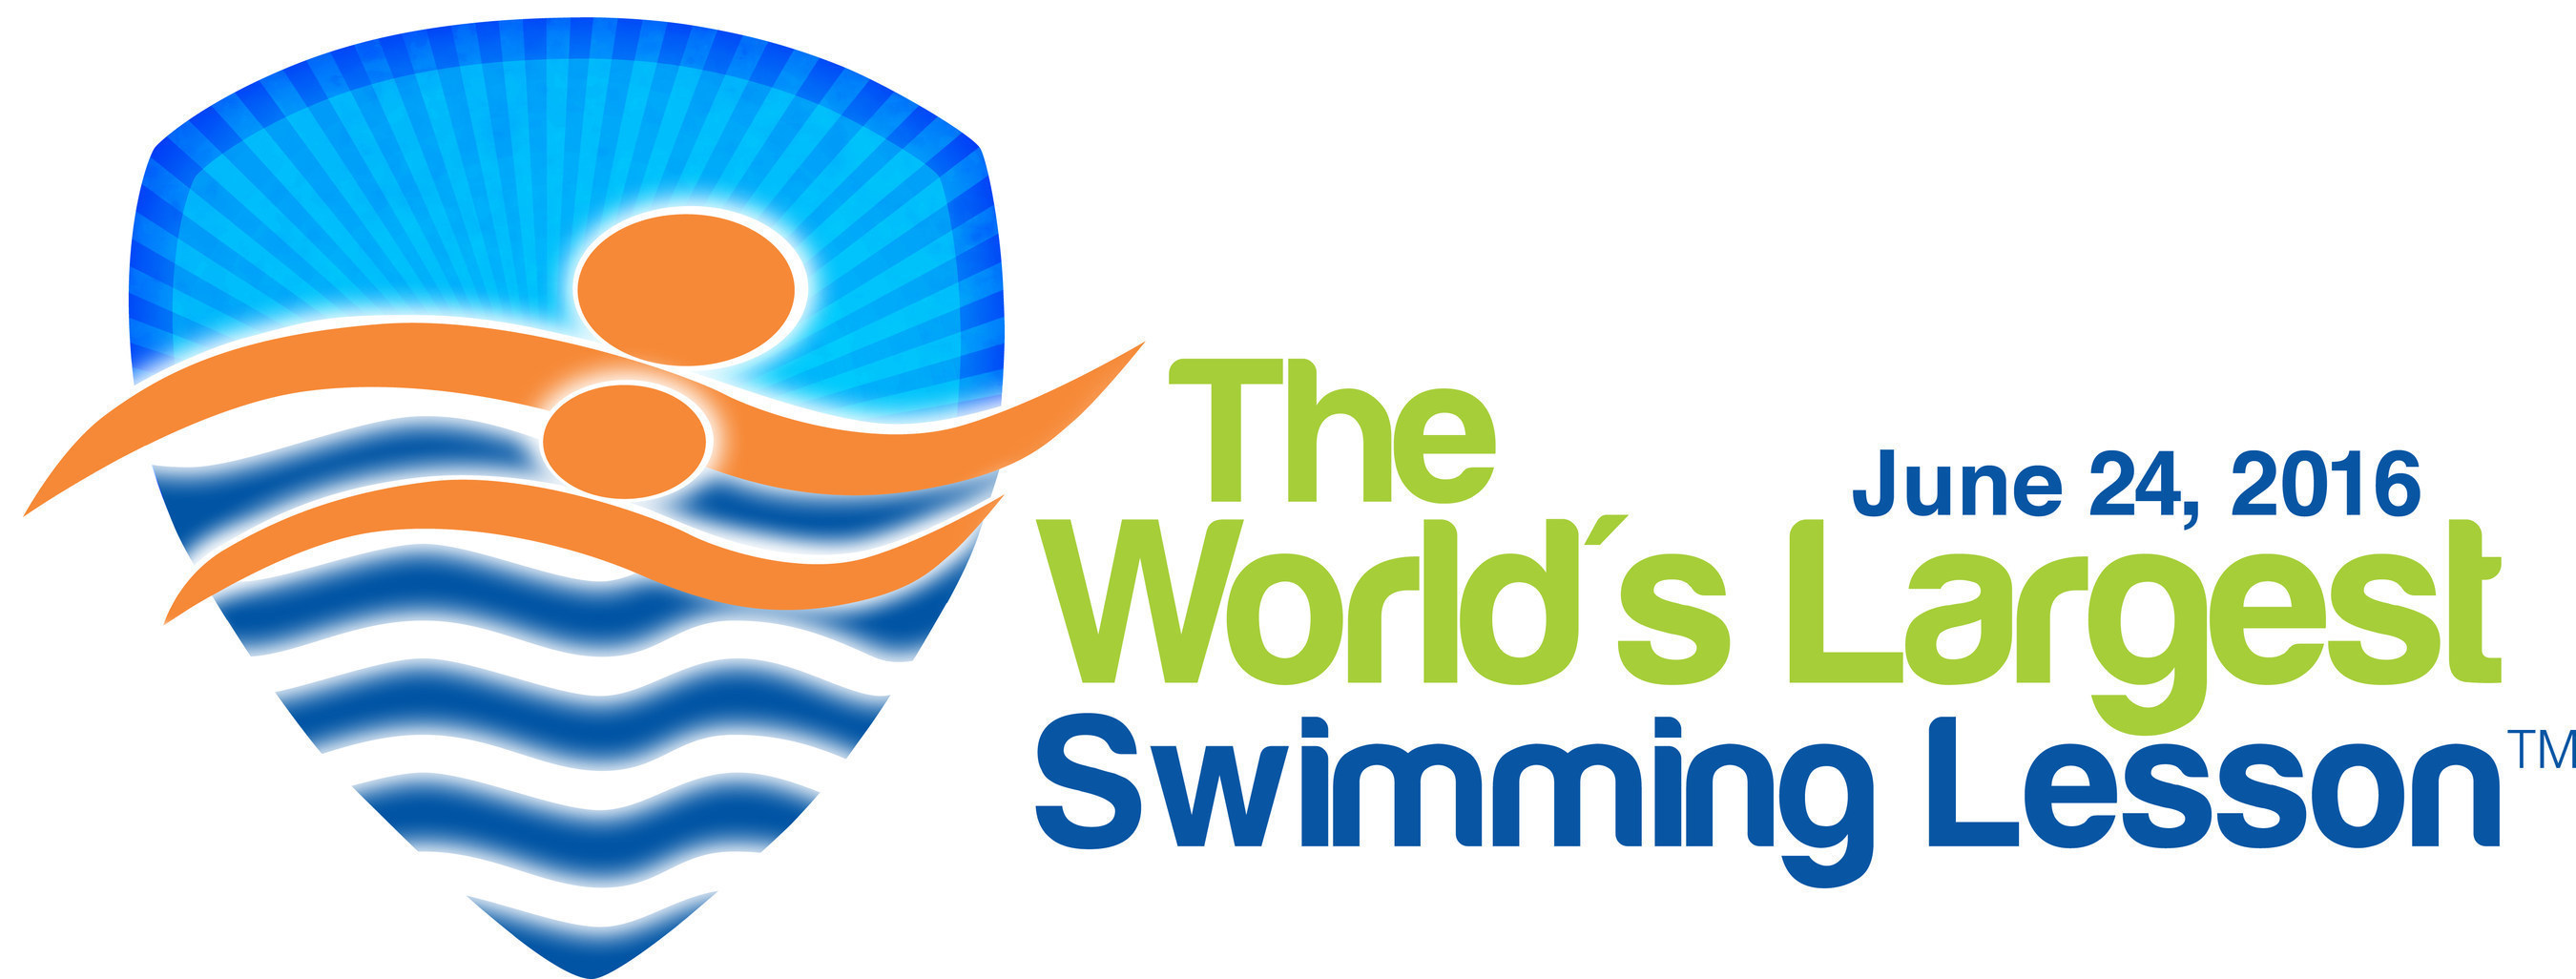 More than 45,000 swimmers expected to participate in World's Largest Swimming Lesson on Friday, June 24 to help prevent childhood drowning. More drowning accidents happen in June than any other month. Drowning is the leading cause of accidental death for children ages 1-4. Kids at 700 locations in 24 countries around the globe along with Olympic Gold Medalists Rowdy Gaines and Janet Evans uniting for the 7th straight year to set a new record and send the message Swimming Lessons Save Lives. #WLSL #Learn2Swim #DrowningIsPreventable @TheWLSL